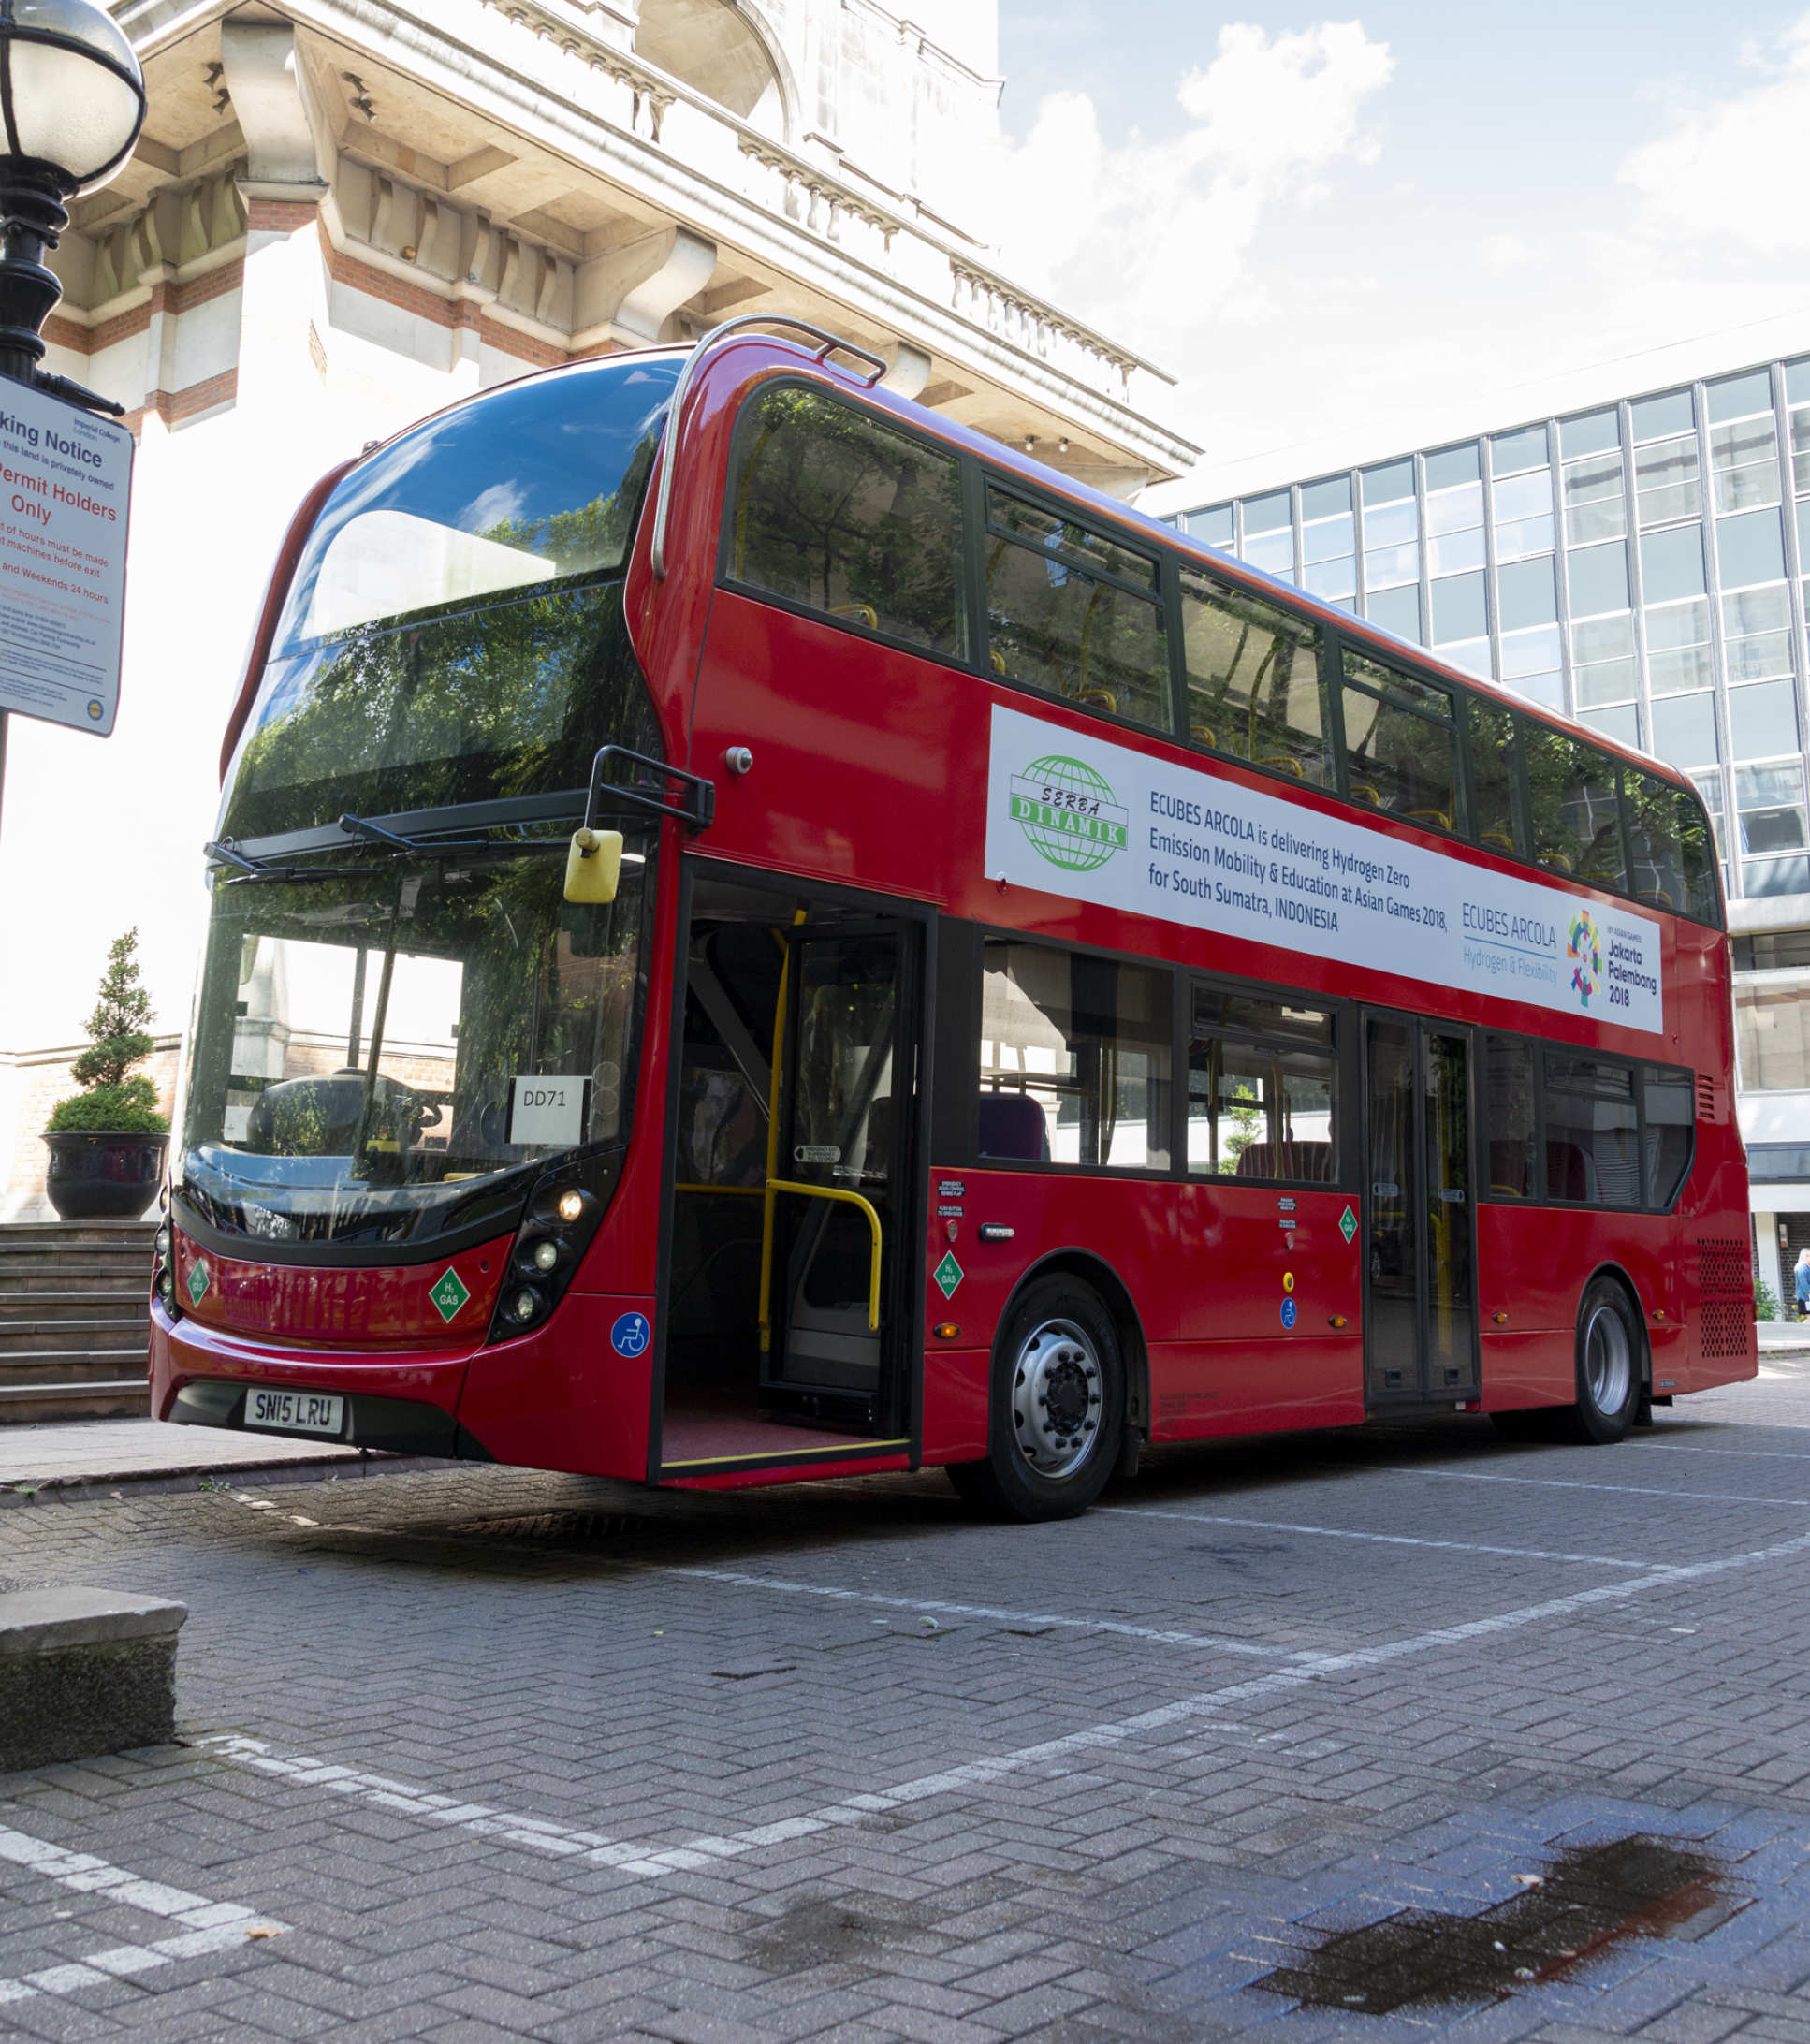 Imperial academics helped develop the bus's fuel cells